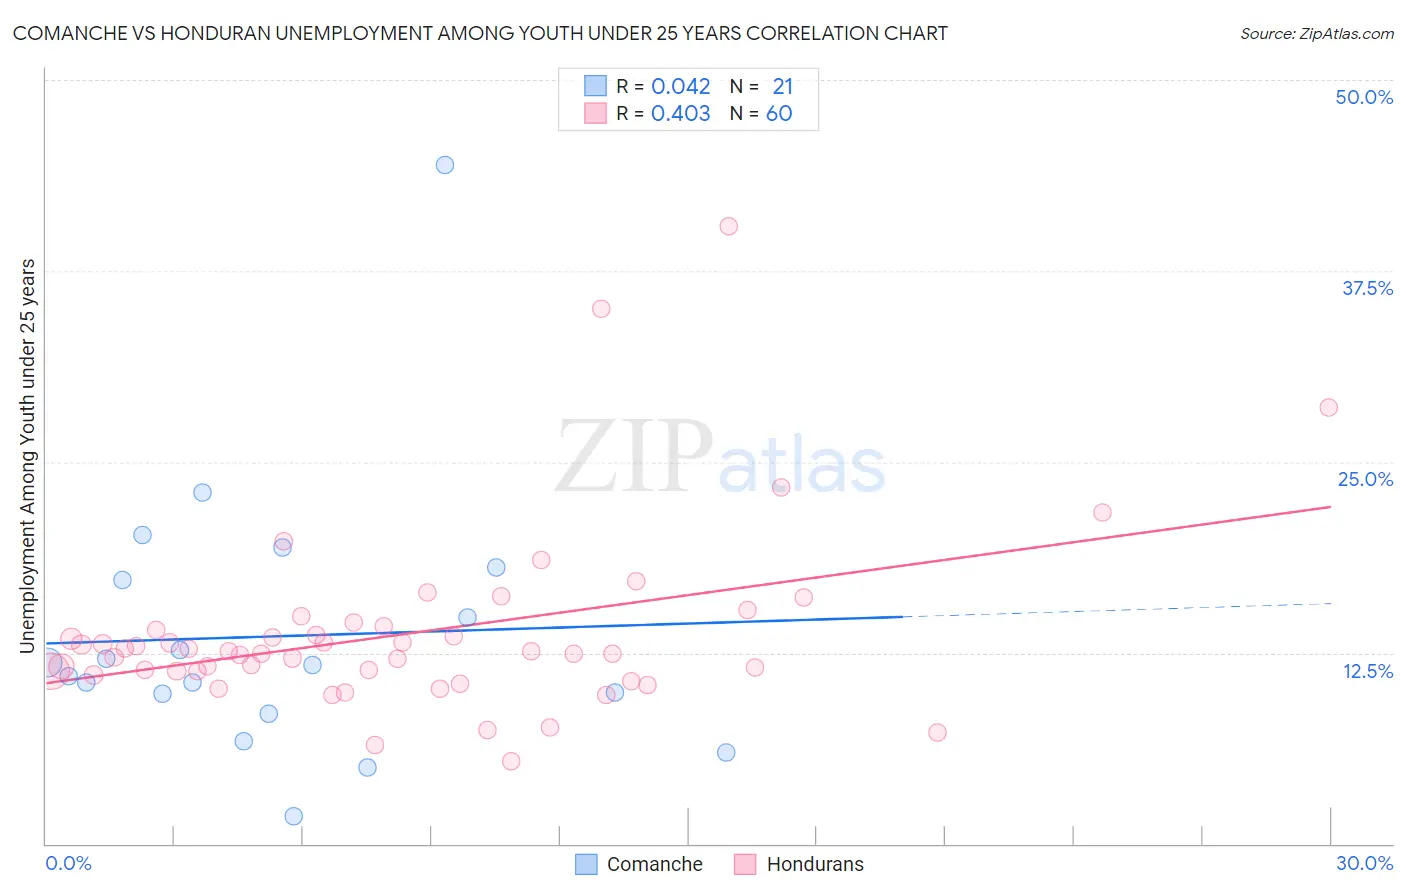 Comanche vs Honduran Unemployment Among Youth under 25 years